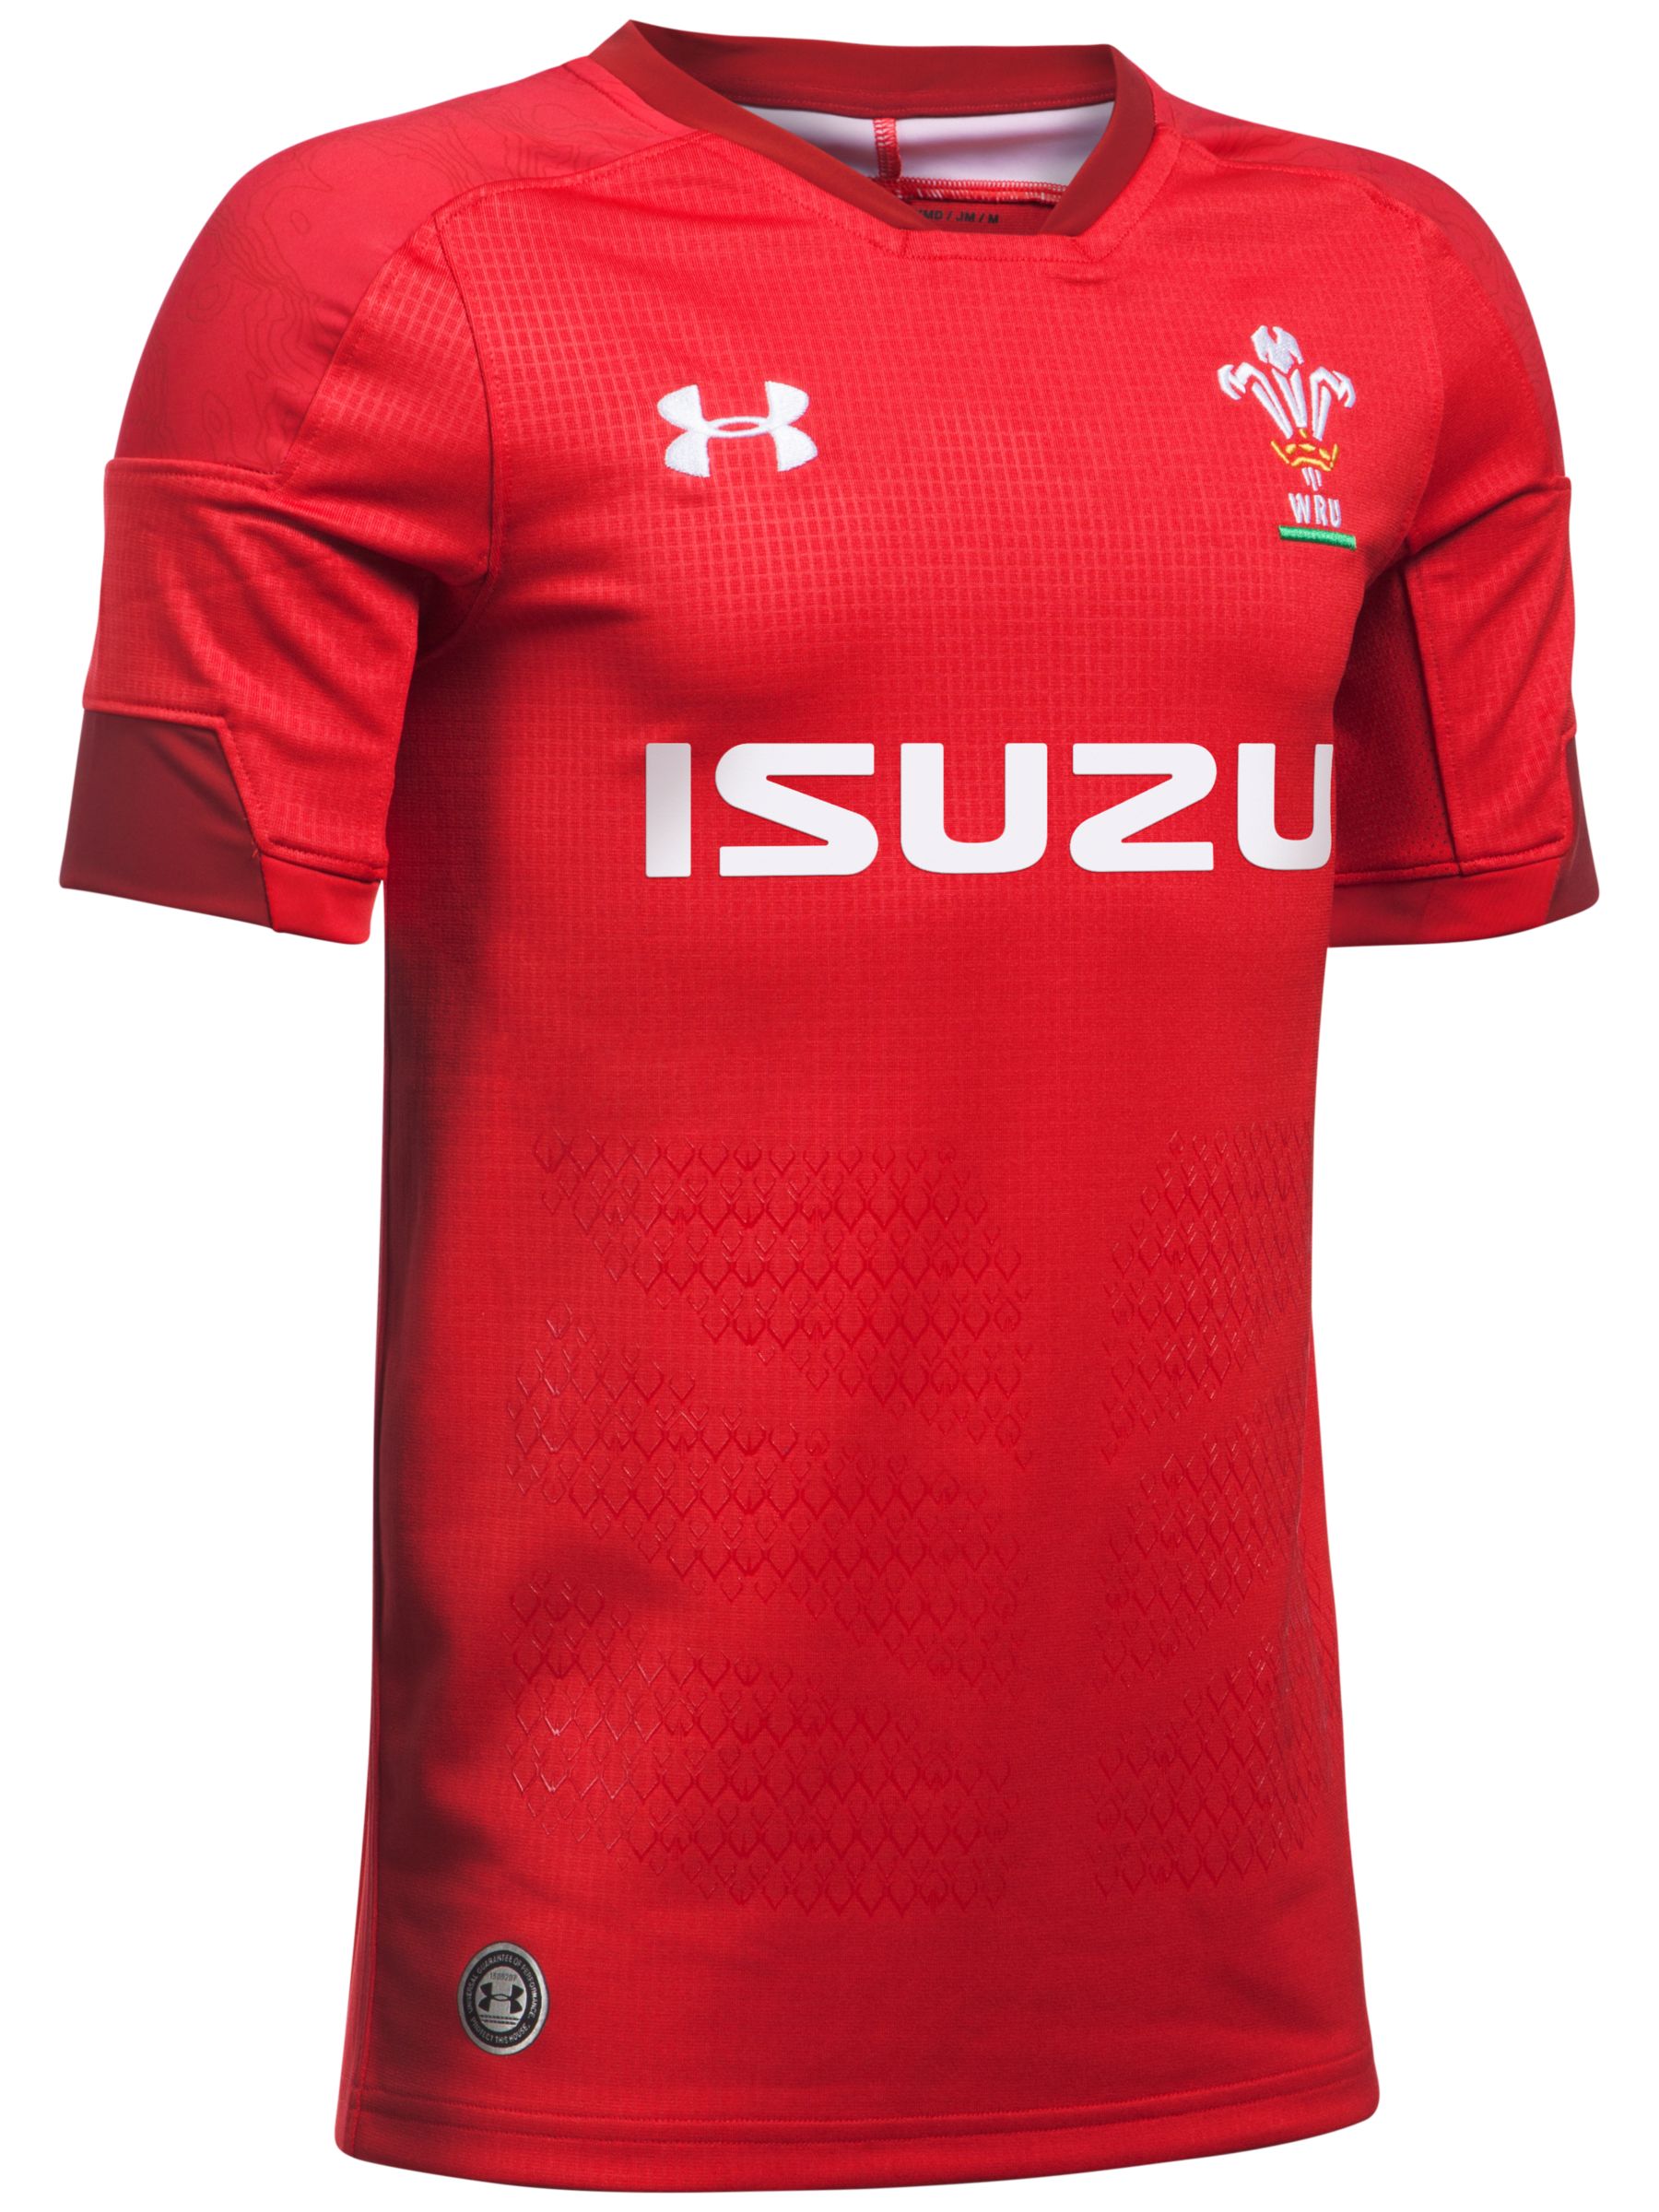 Under Armour Official Welsh Rugby Union Supporters Shirt, Red at John